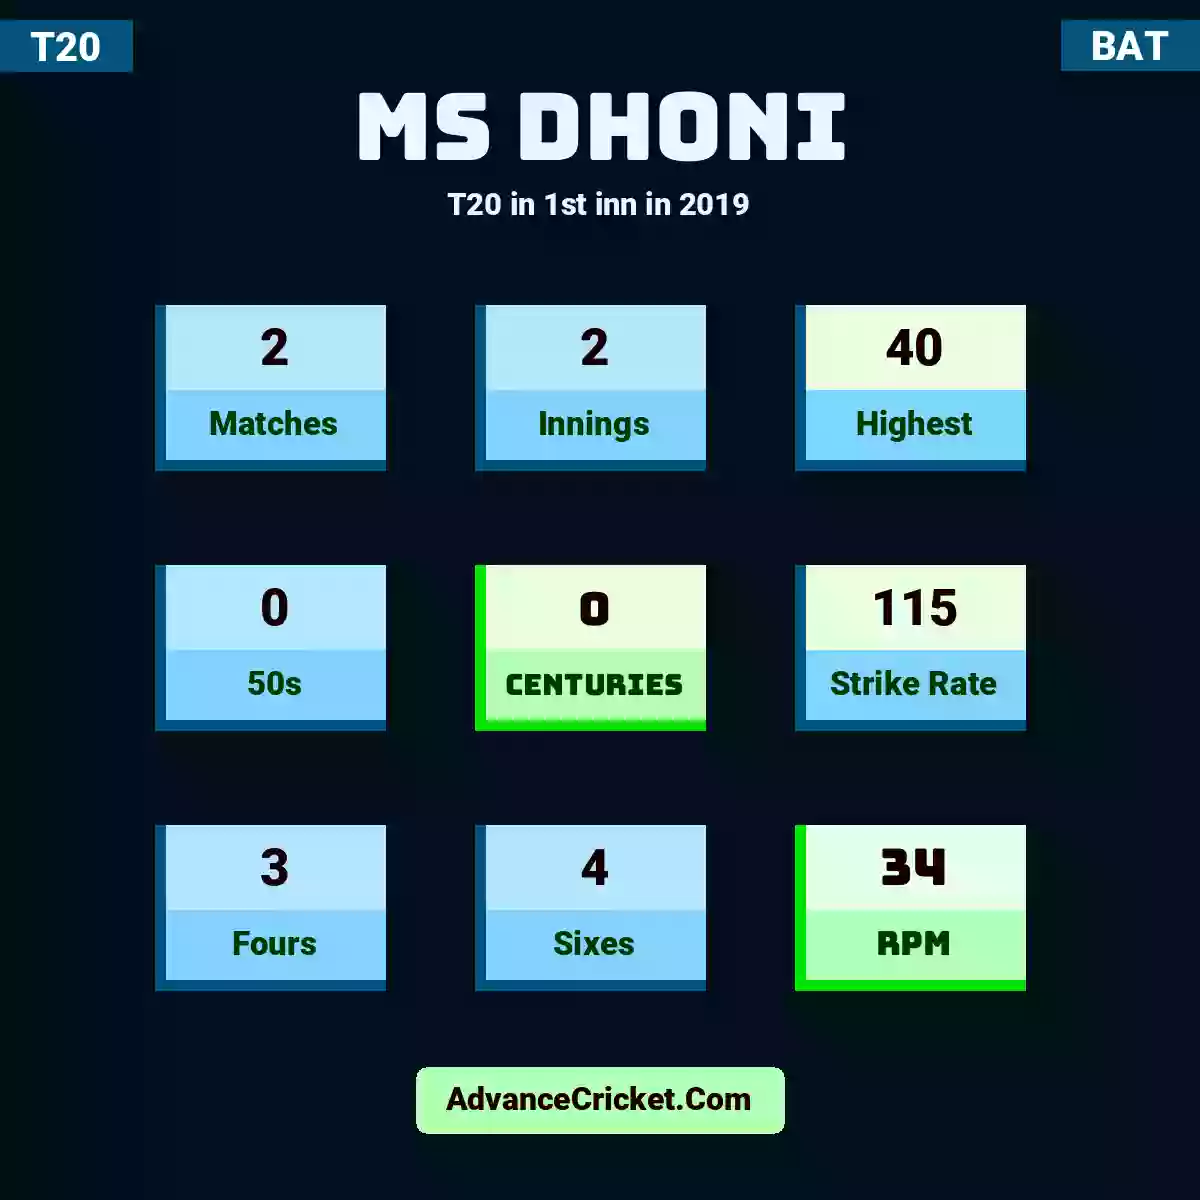 MS Dhoni T20  in 1st inn in 2019, MS Dhoni played 2 matches, scored 40 runs as highest, 0 half-centuries, and 0 centuries, with a strike rate of 115. M.Dhoni hit 3 fours and 4 sixes, with an RPM of 34.